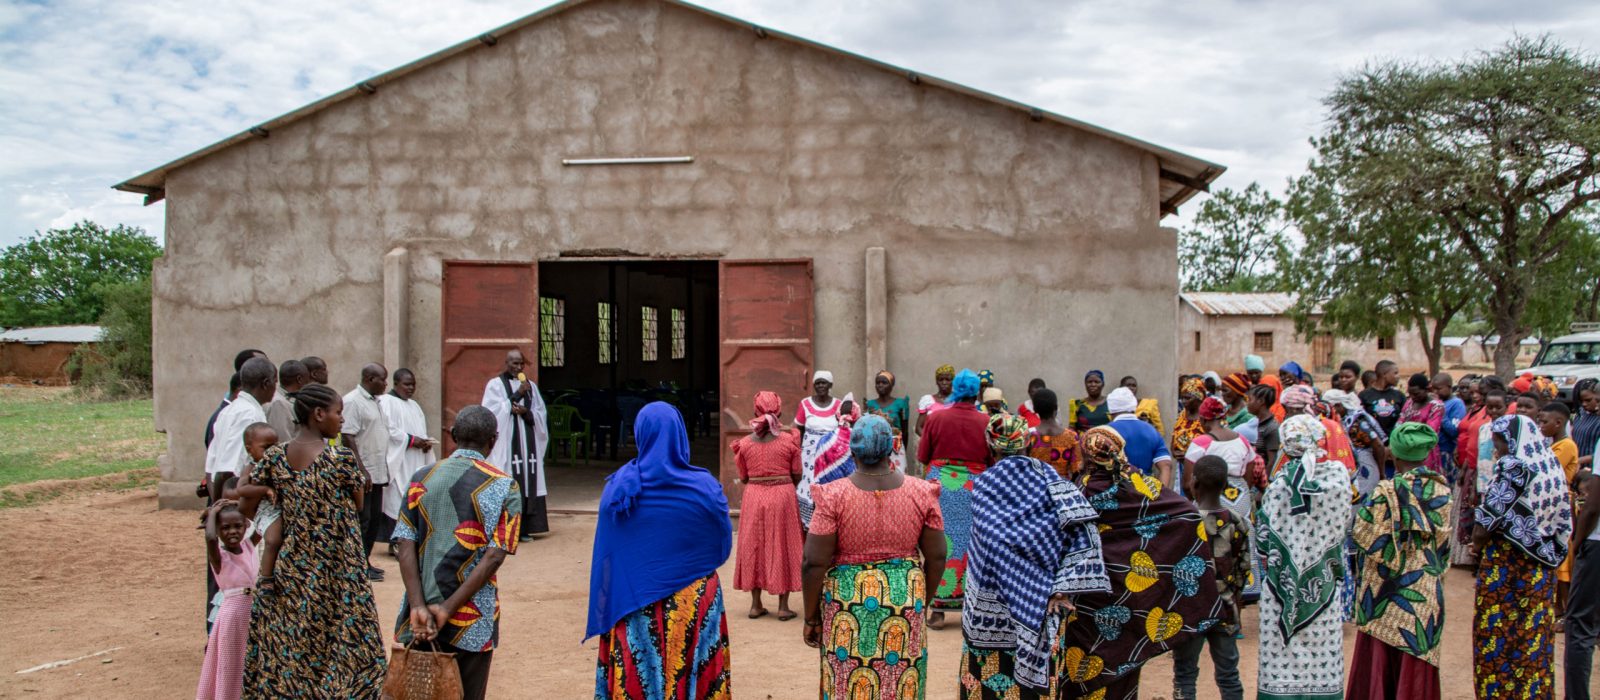 Worshippers gather outside church after service in Dodoma, Tanzania, on 16 January 2022.
Tearfund Canada, through its Church-based Community Transformation, provides training in conservation agriculture and savings groups to farmers and their families.